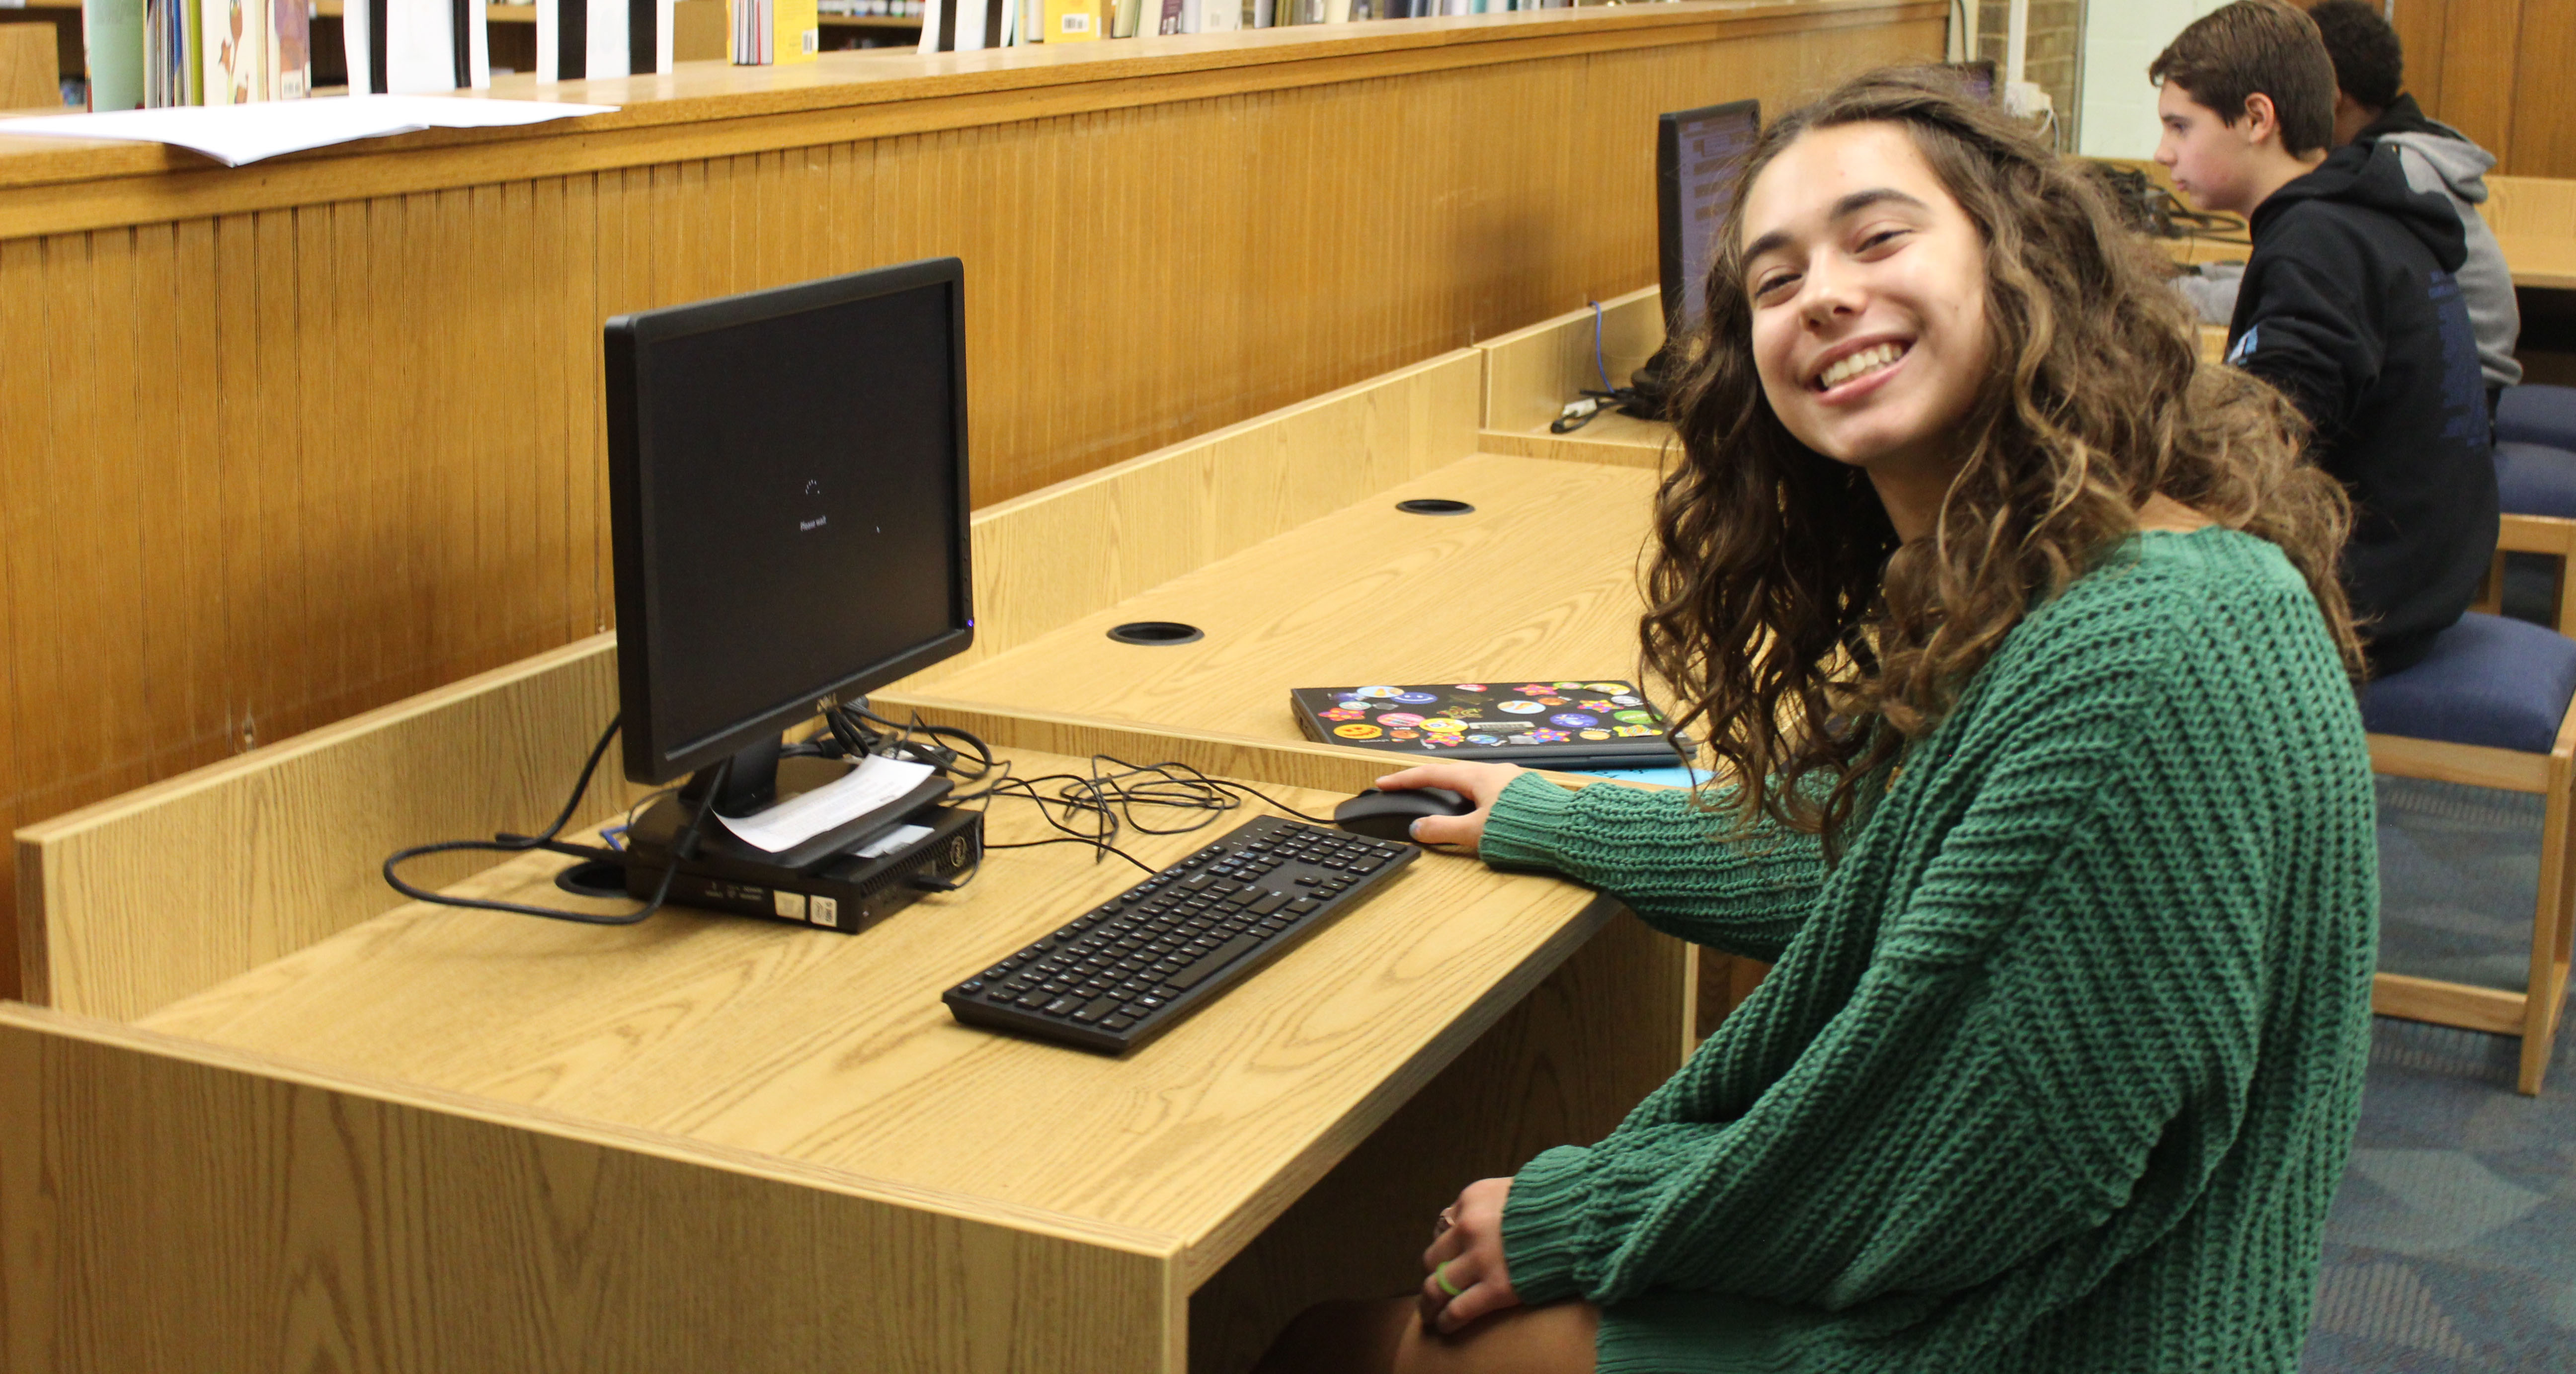 A student working on the computer in the school library